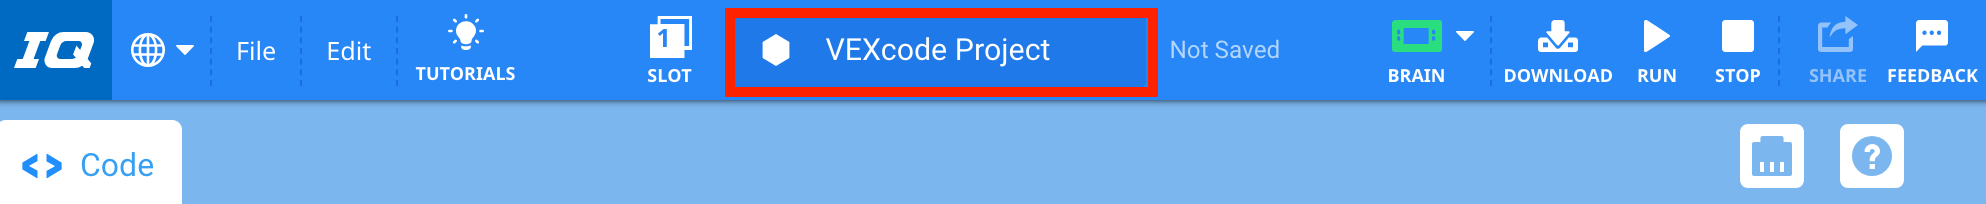 Project name window